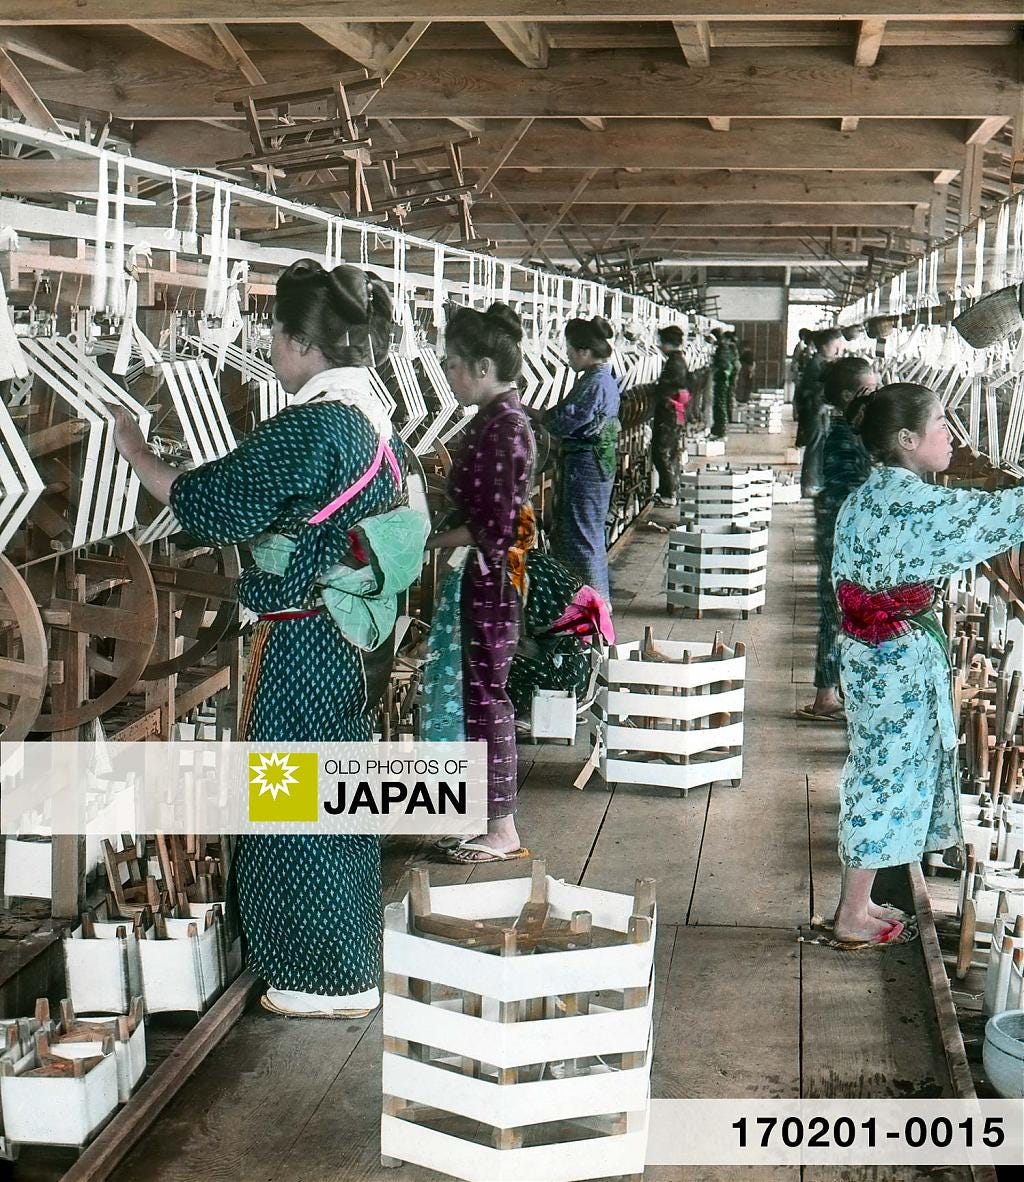 Japanese women and girls reeling silk at a factory, 1900s